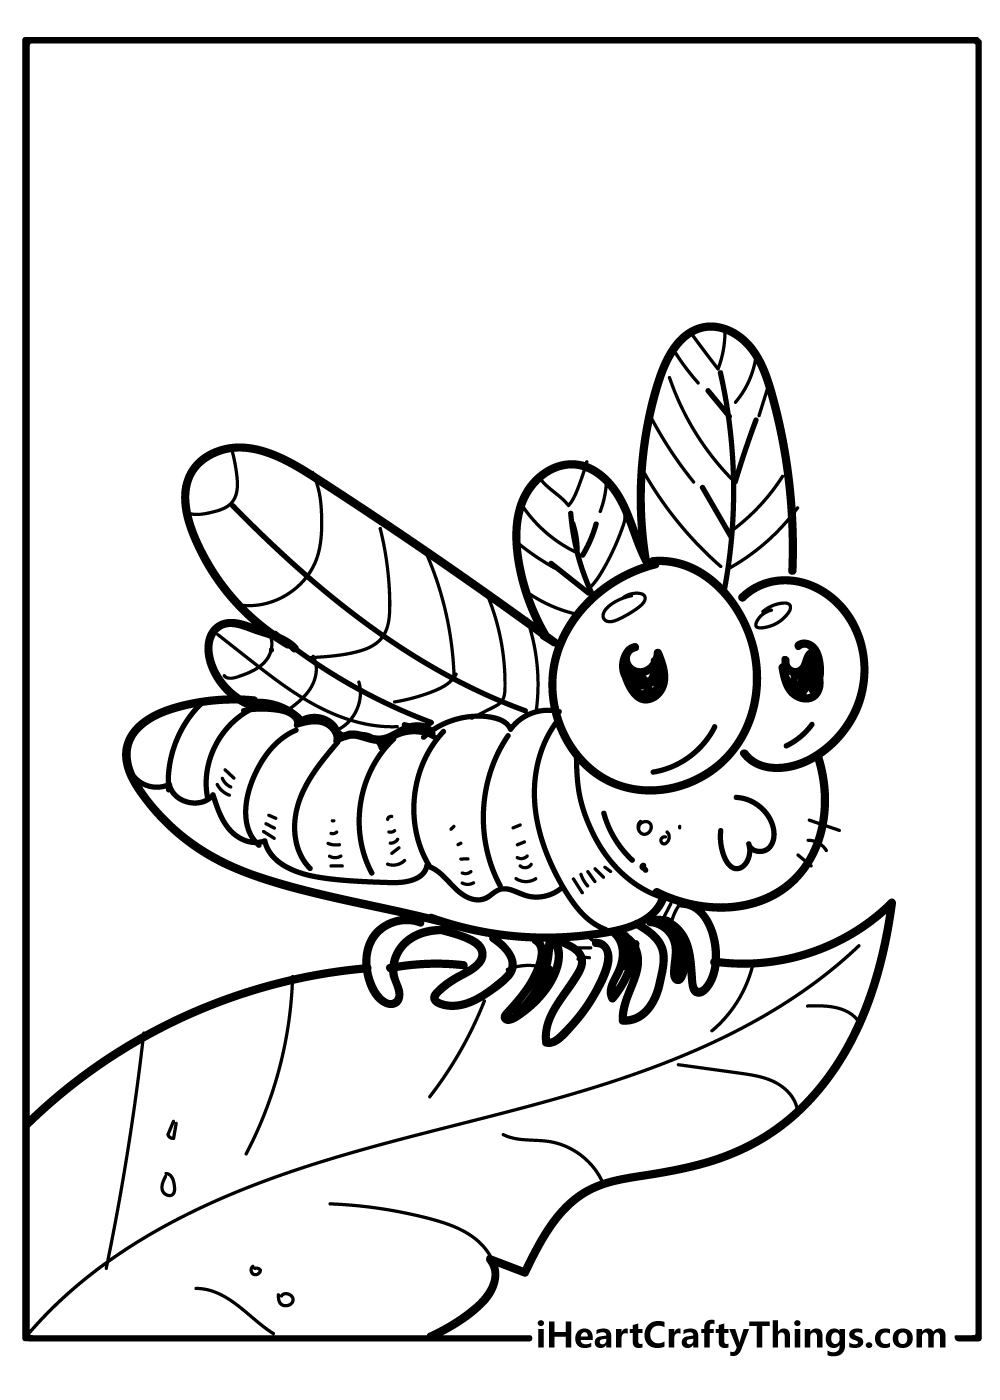 Bug Coloring Book for adults free download